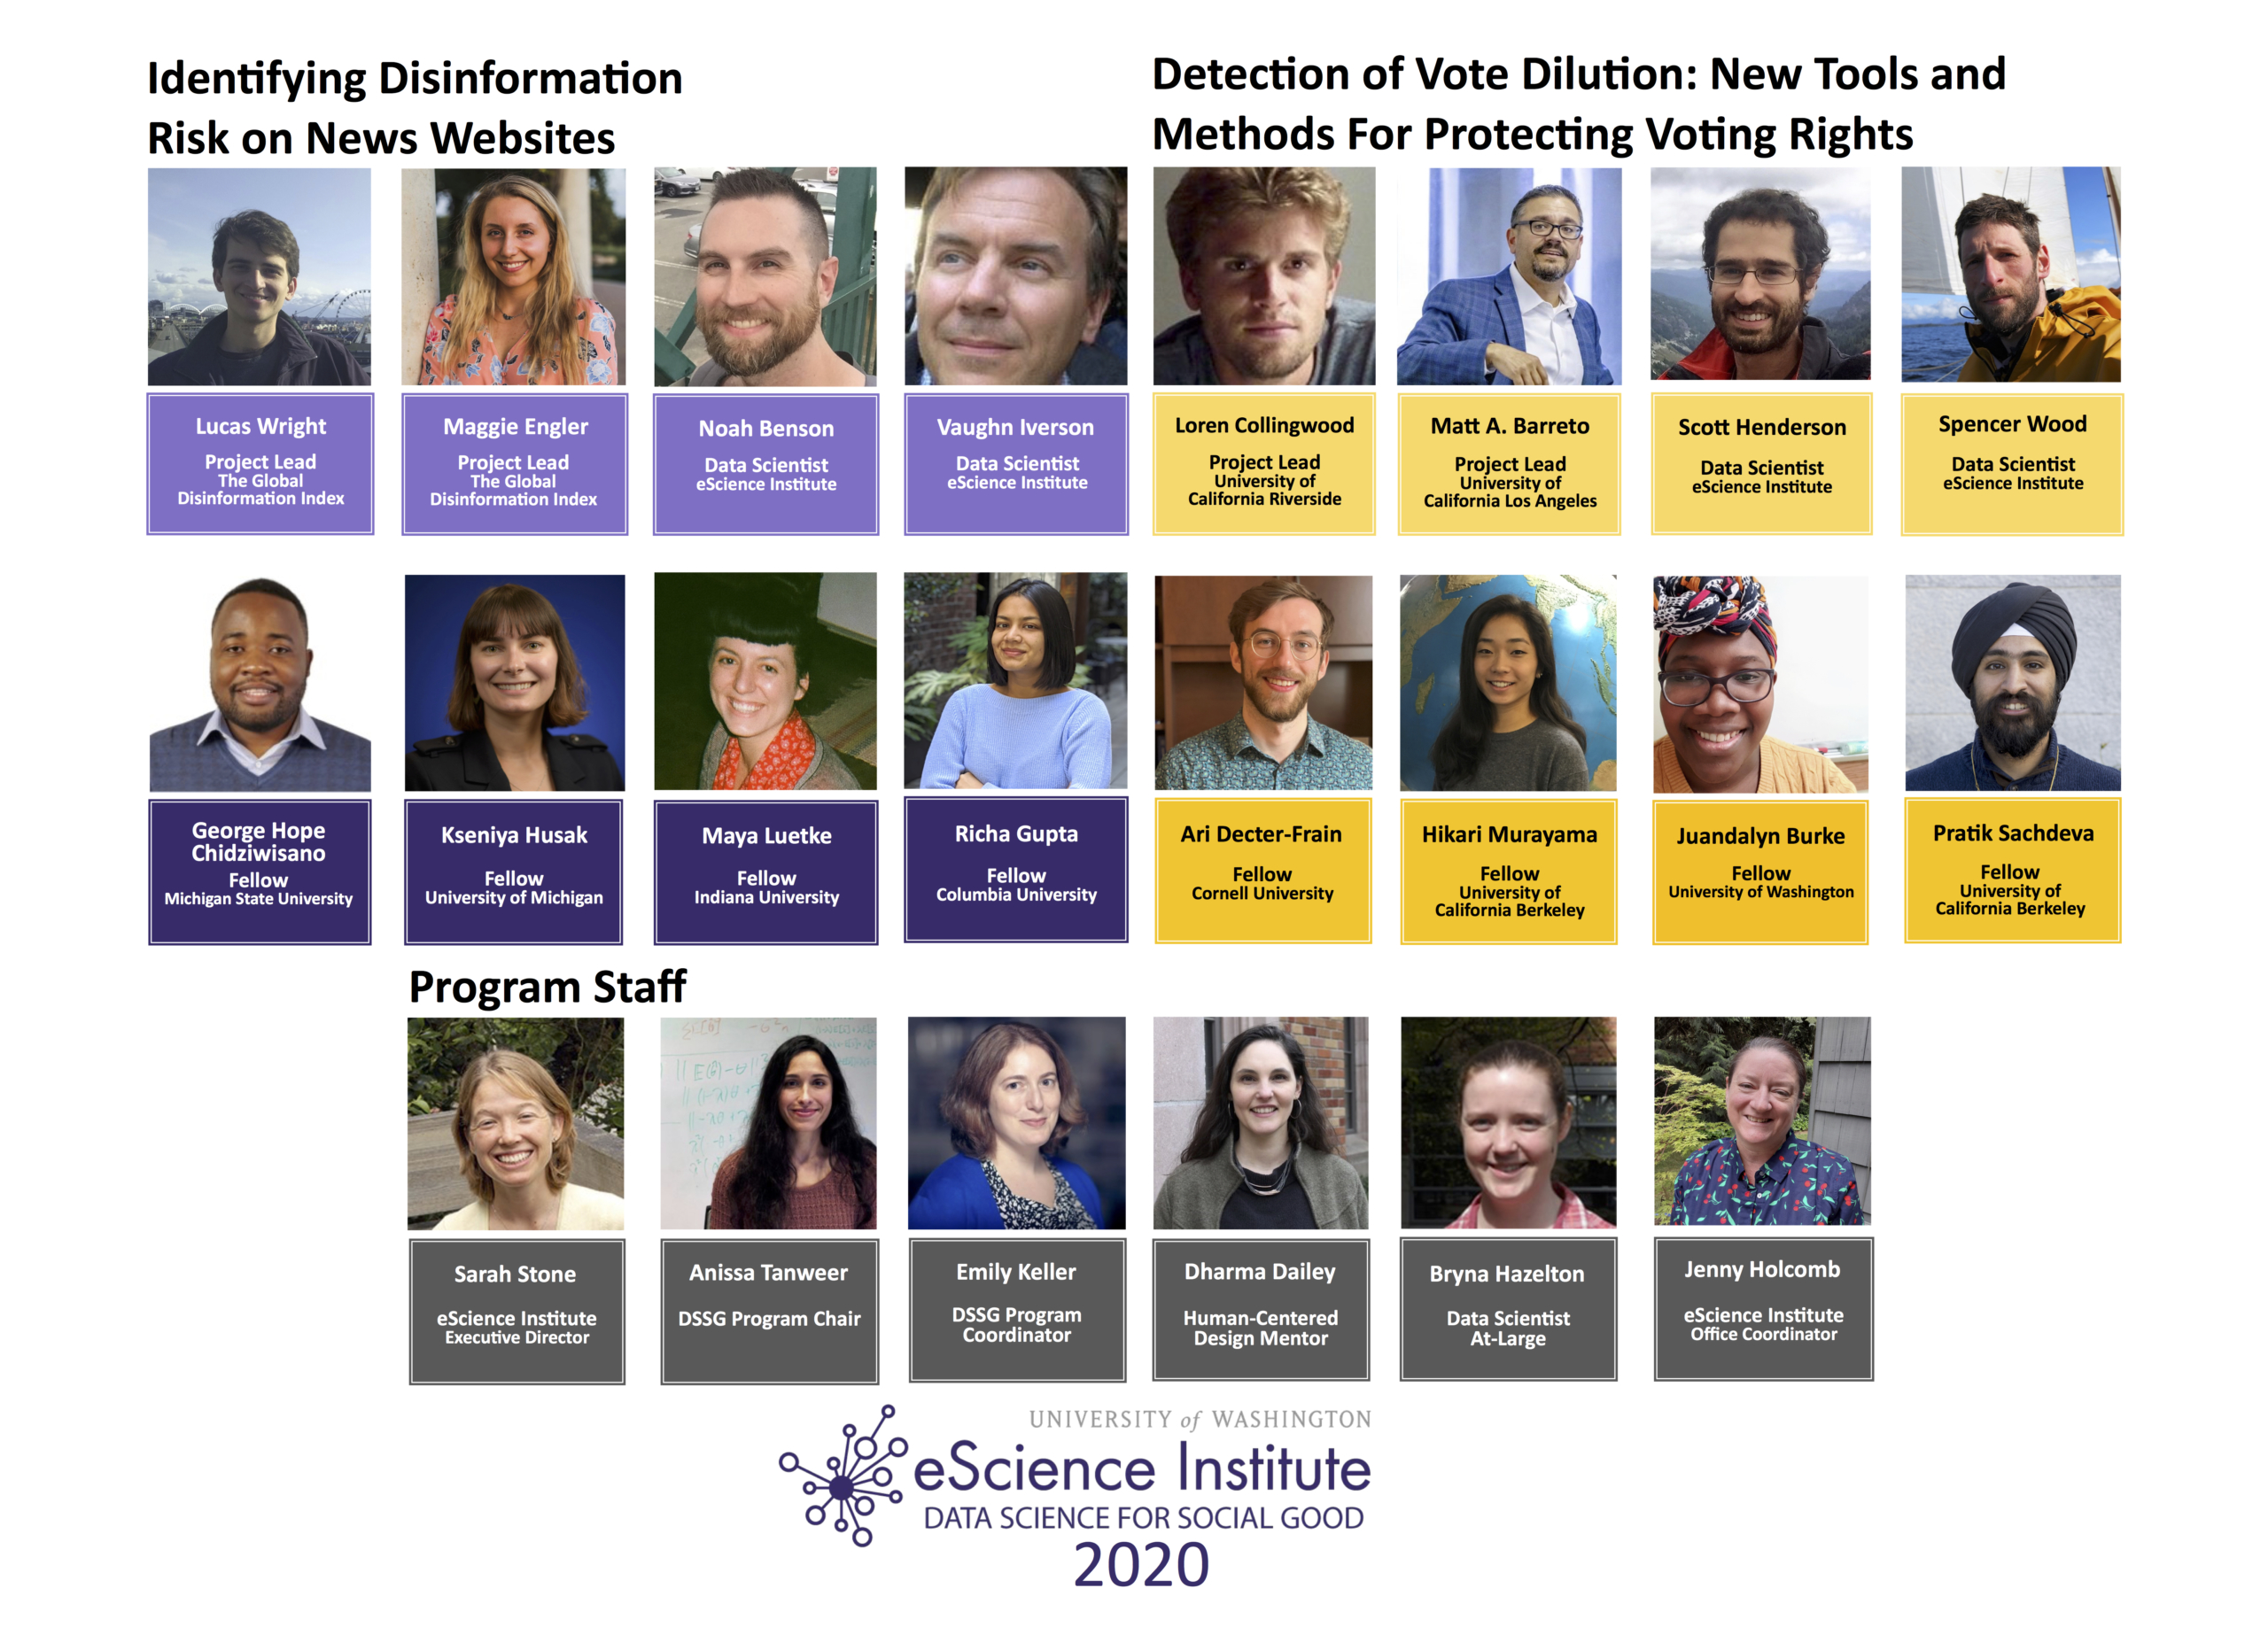 Data Science for Social Good launches projects on polarized voting and online disinformation